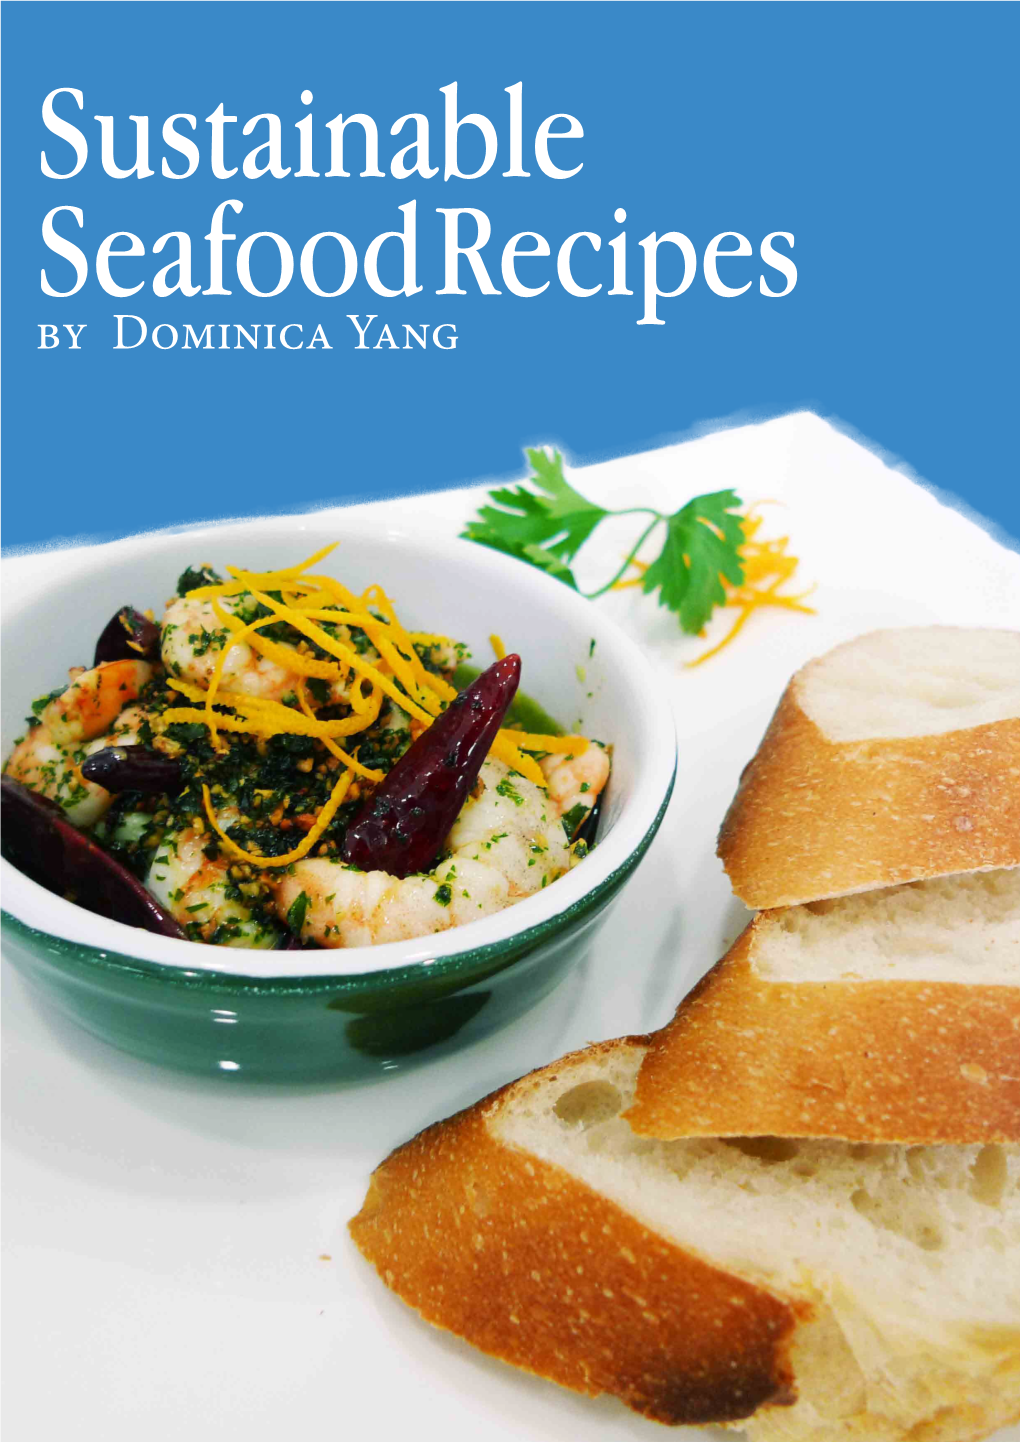 Sustainable Seafood Recipes